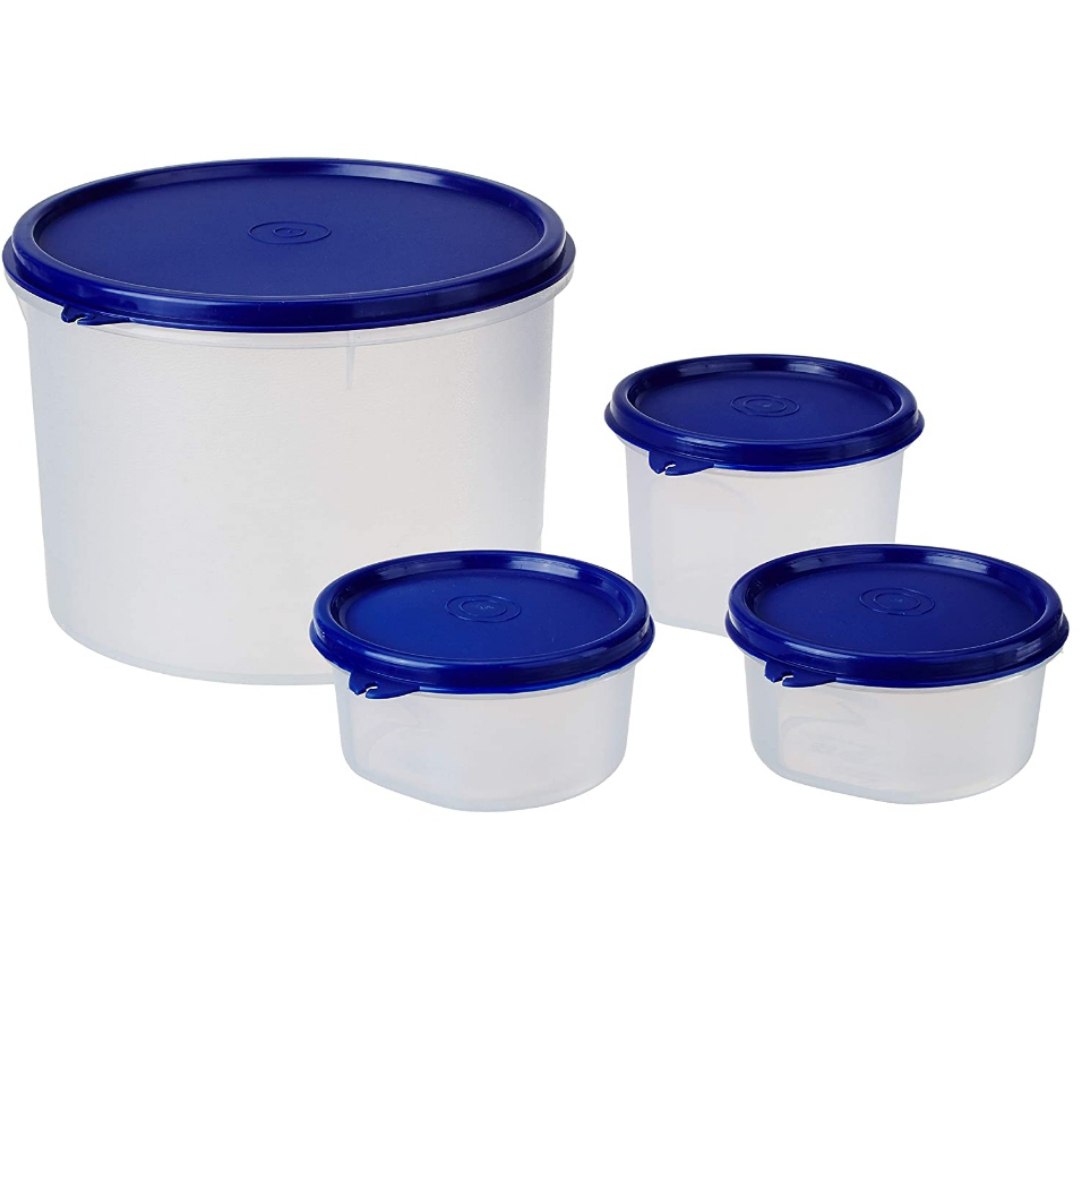 Solimo Round Plastic Containers